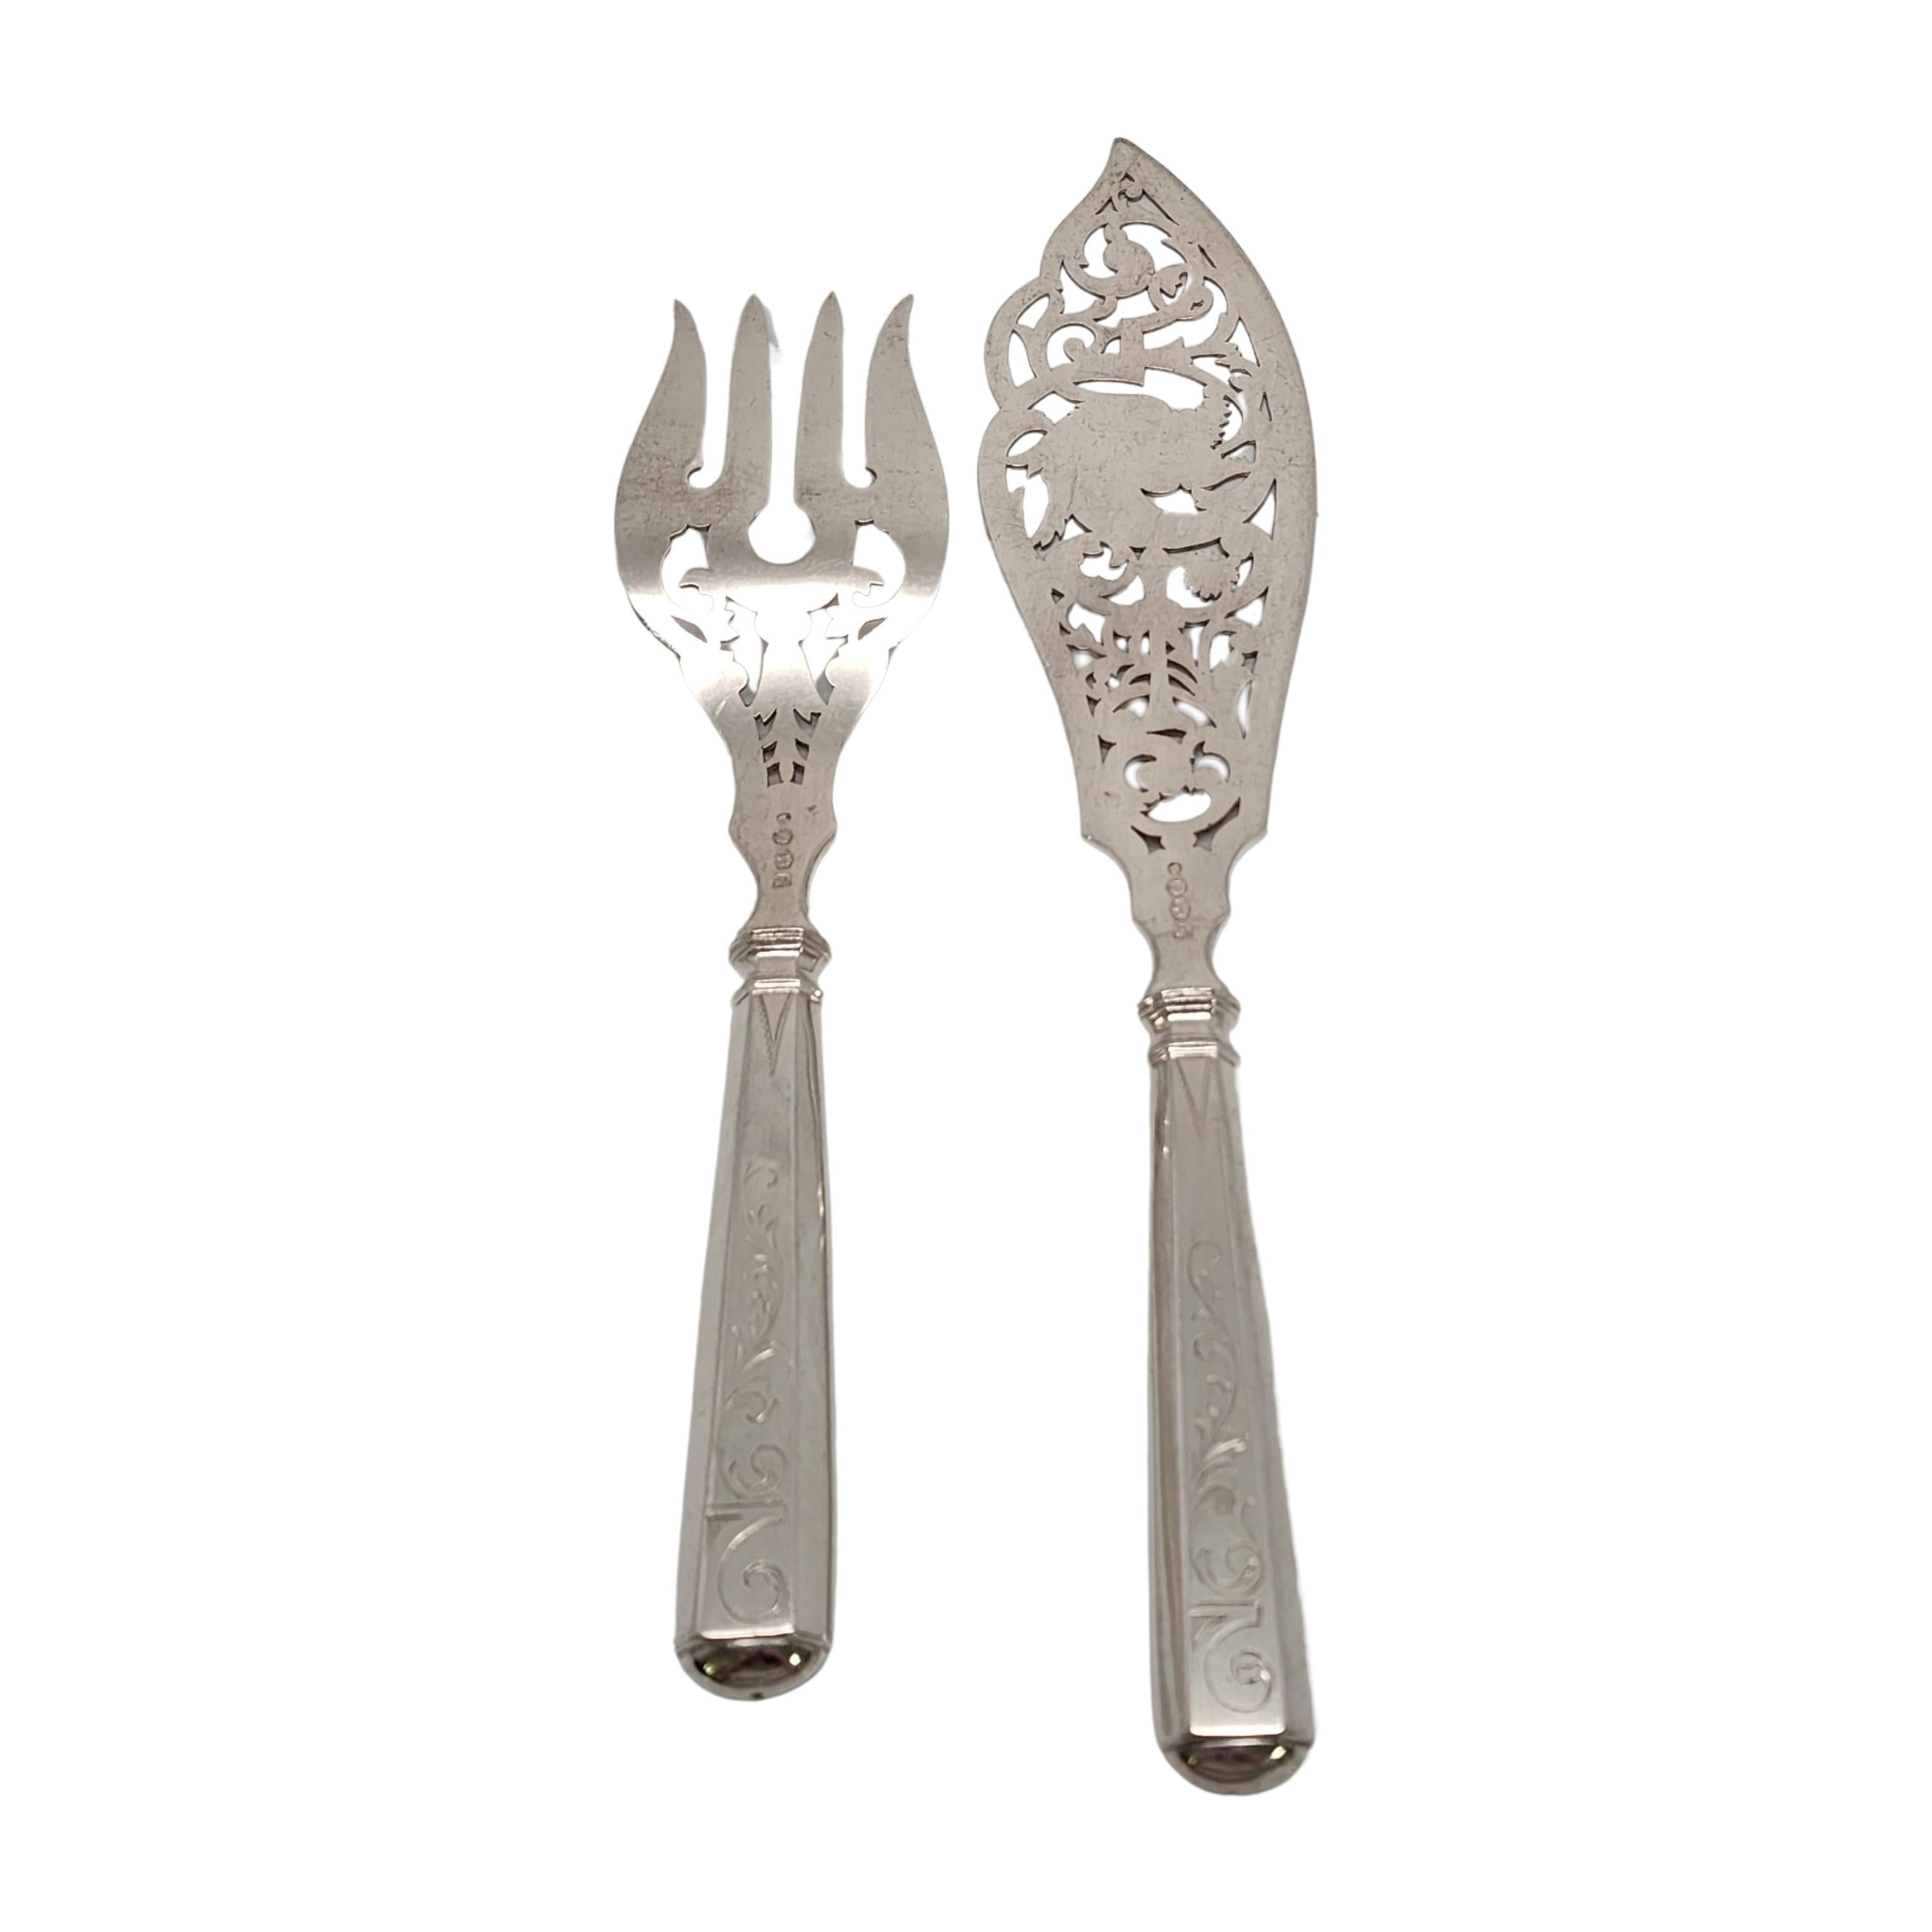 Antique Dutch 833 silver fish serving fork and knife set by KA van Kempen, circa 1887.

No monogram

The set designed by JM van Kempen are beautifully ornate with pierced and etched tines and blade. The handles feature etched swirl designs and a